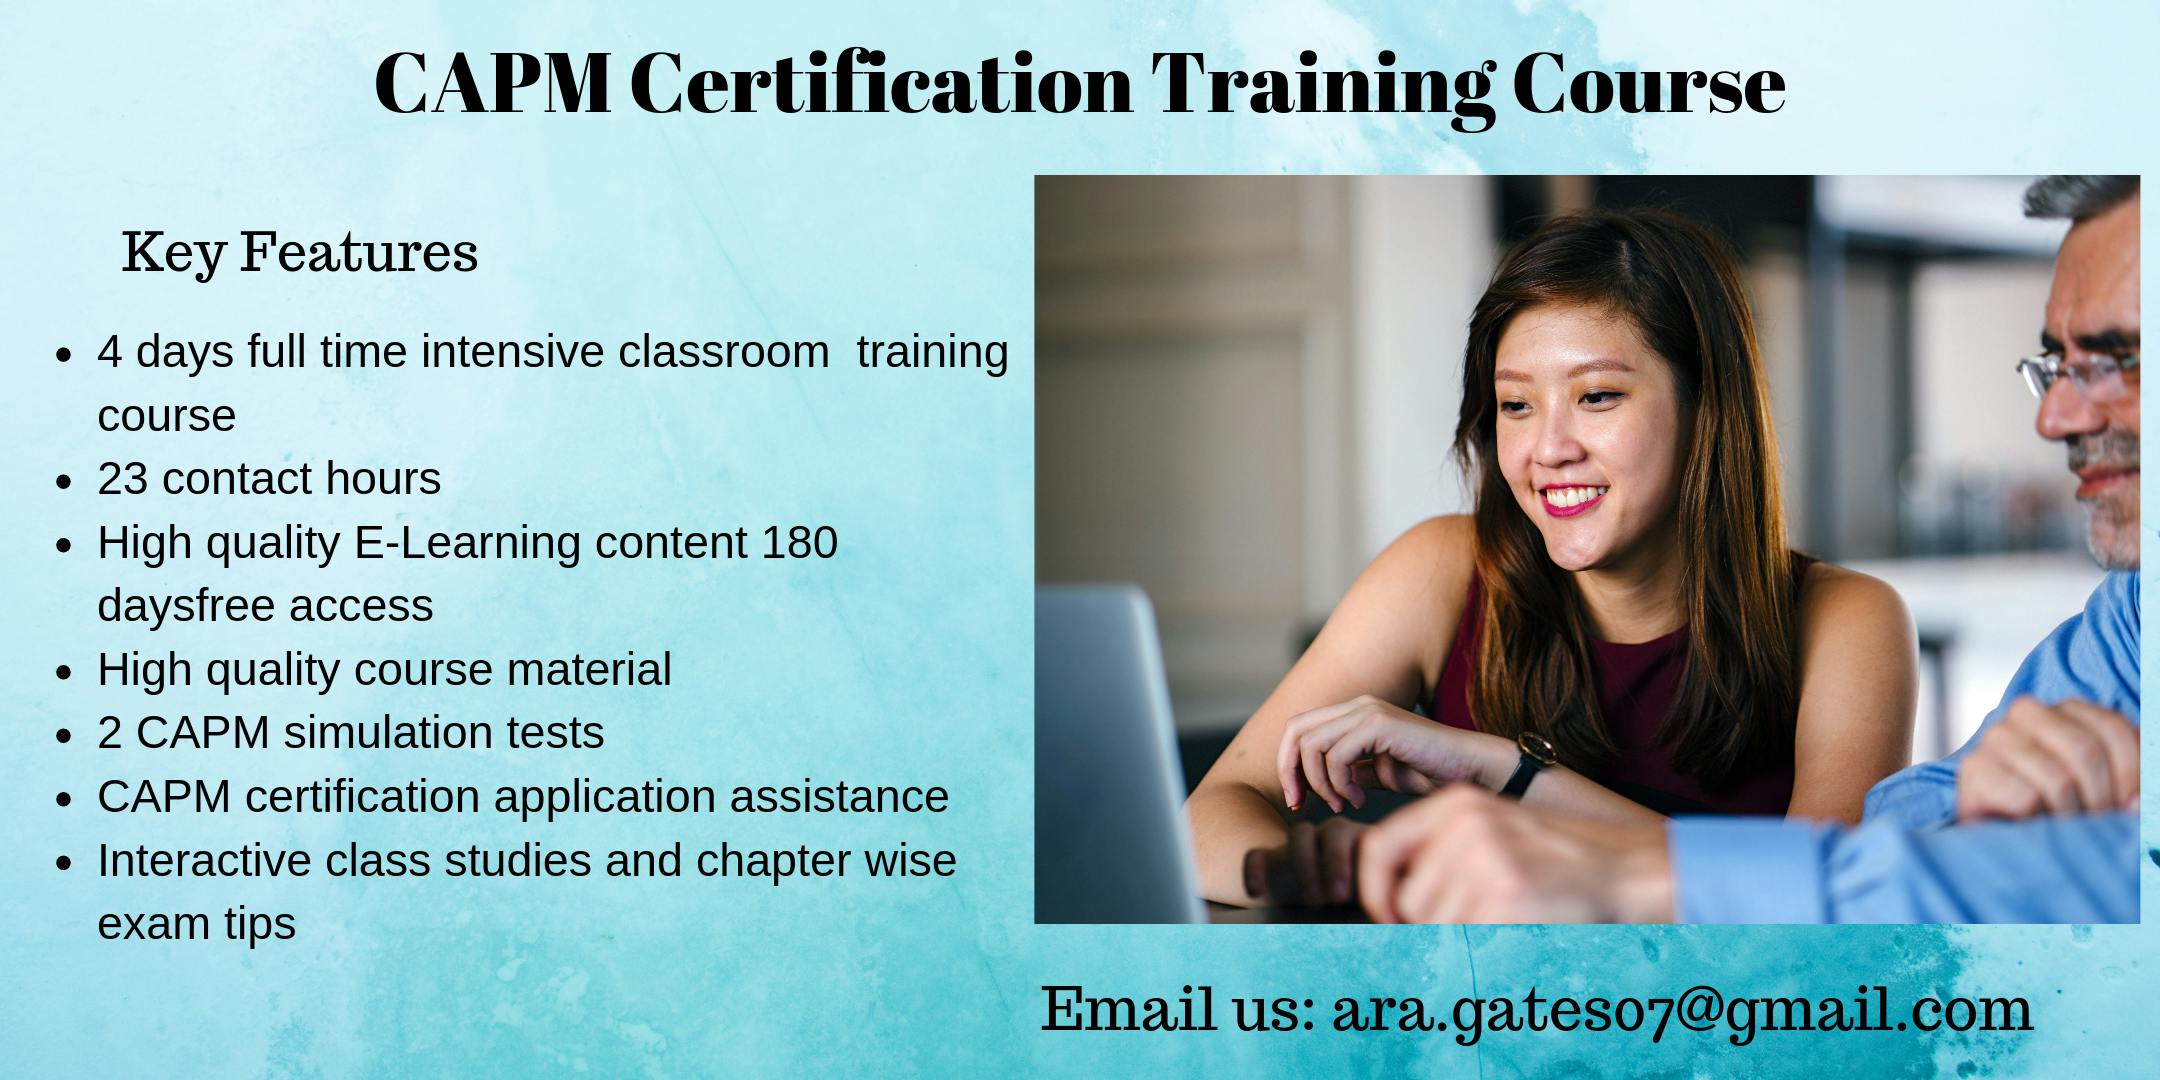 CAPM Certification Course in Corvallis, OR